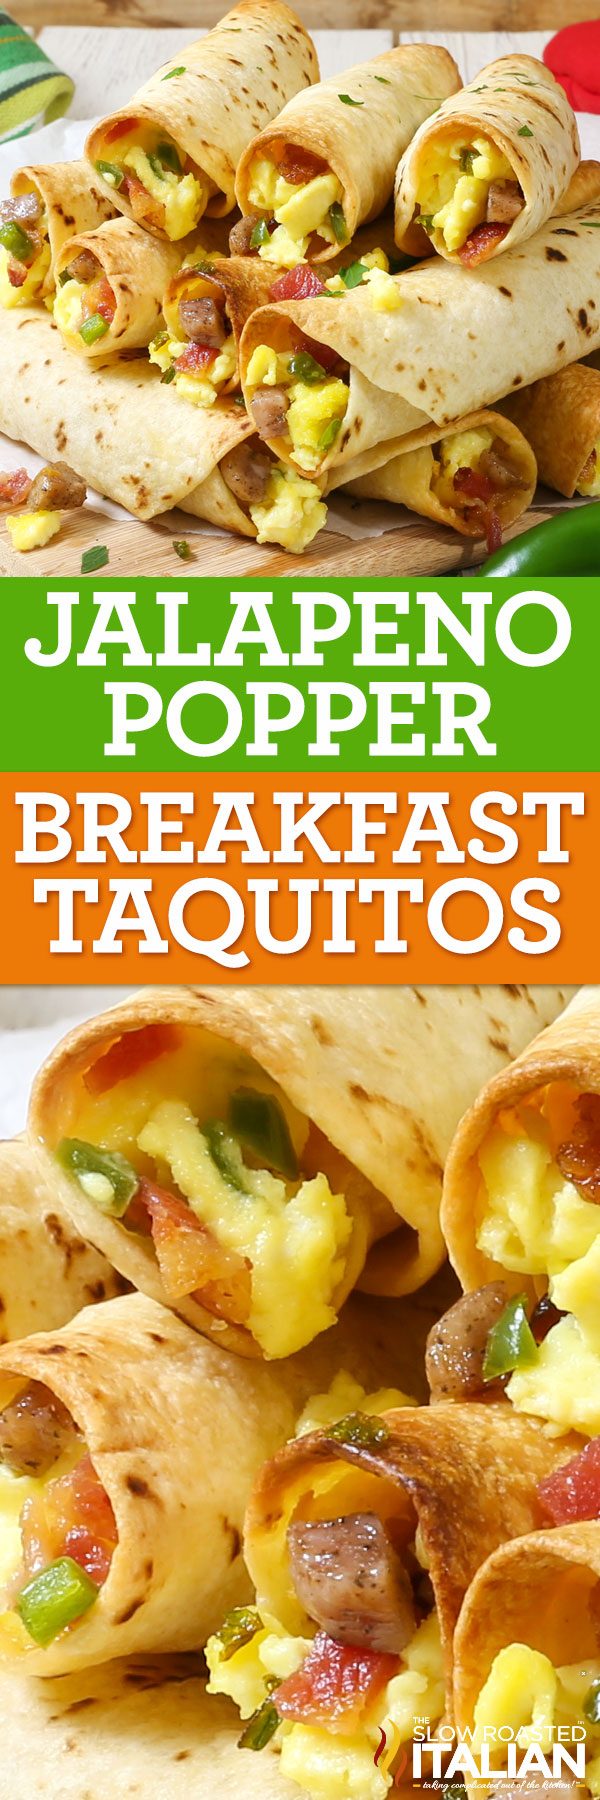 titled jalapeno popper breakfast taquitos